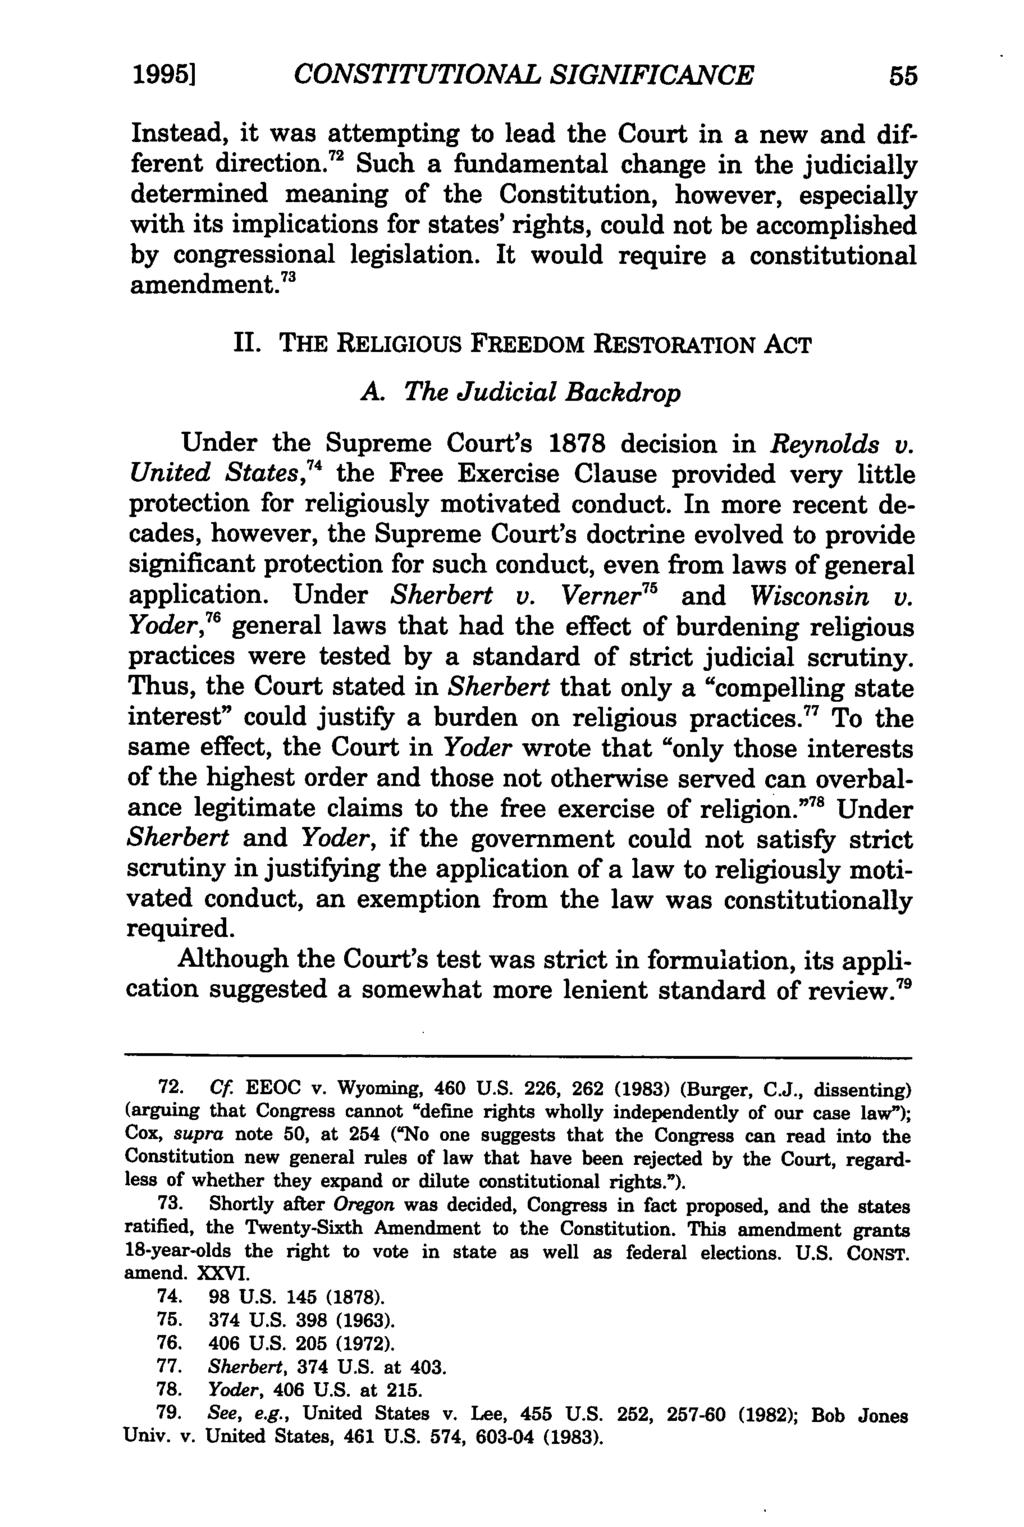 1995] Conkle: The Religious Freedom Restoration Act CONSTITUTIONAL SIGNIFICANCE Instead, it was attempting to lead the Court in a new and different direction.